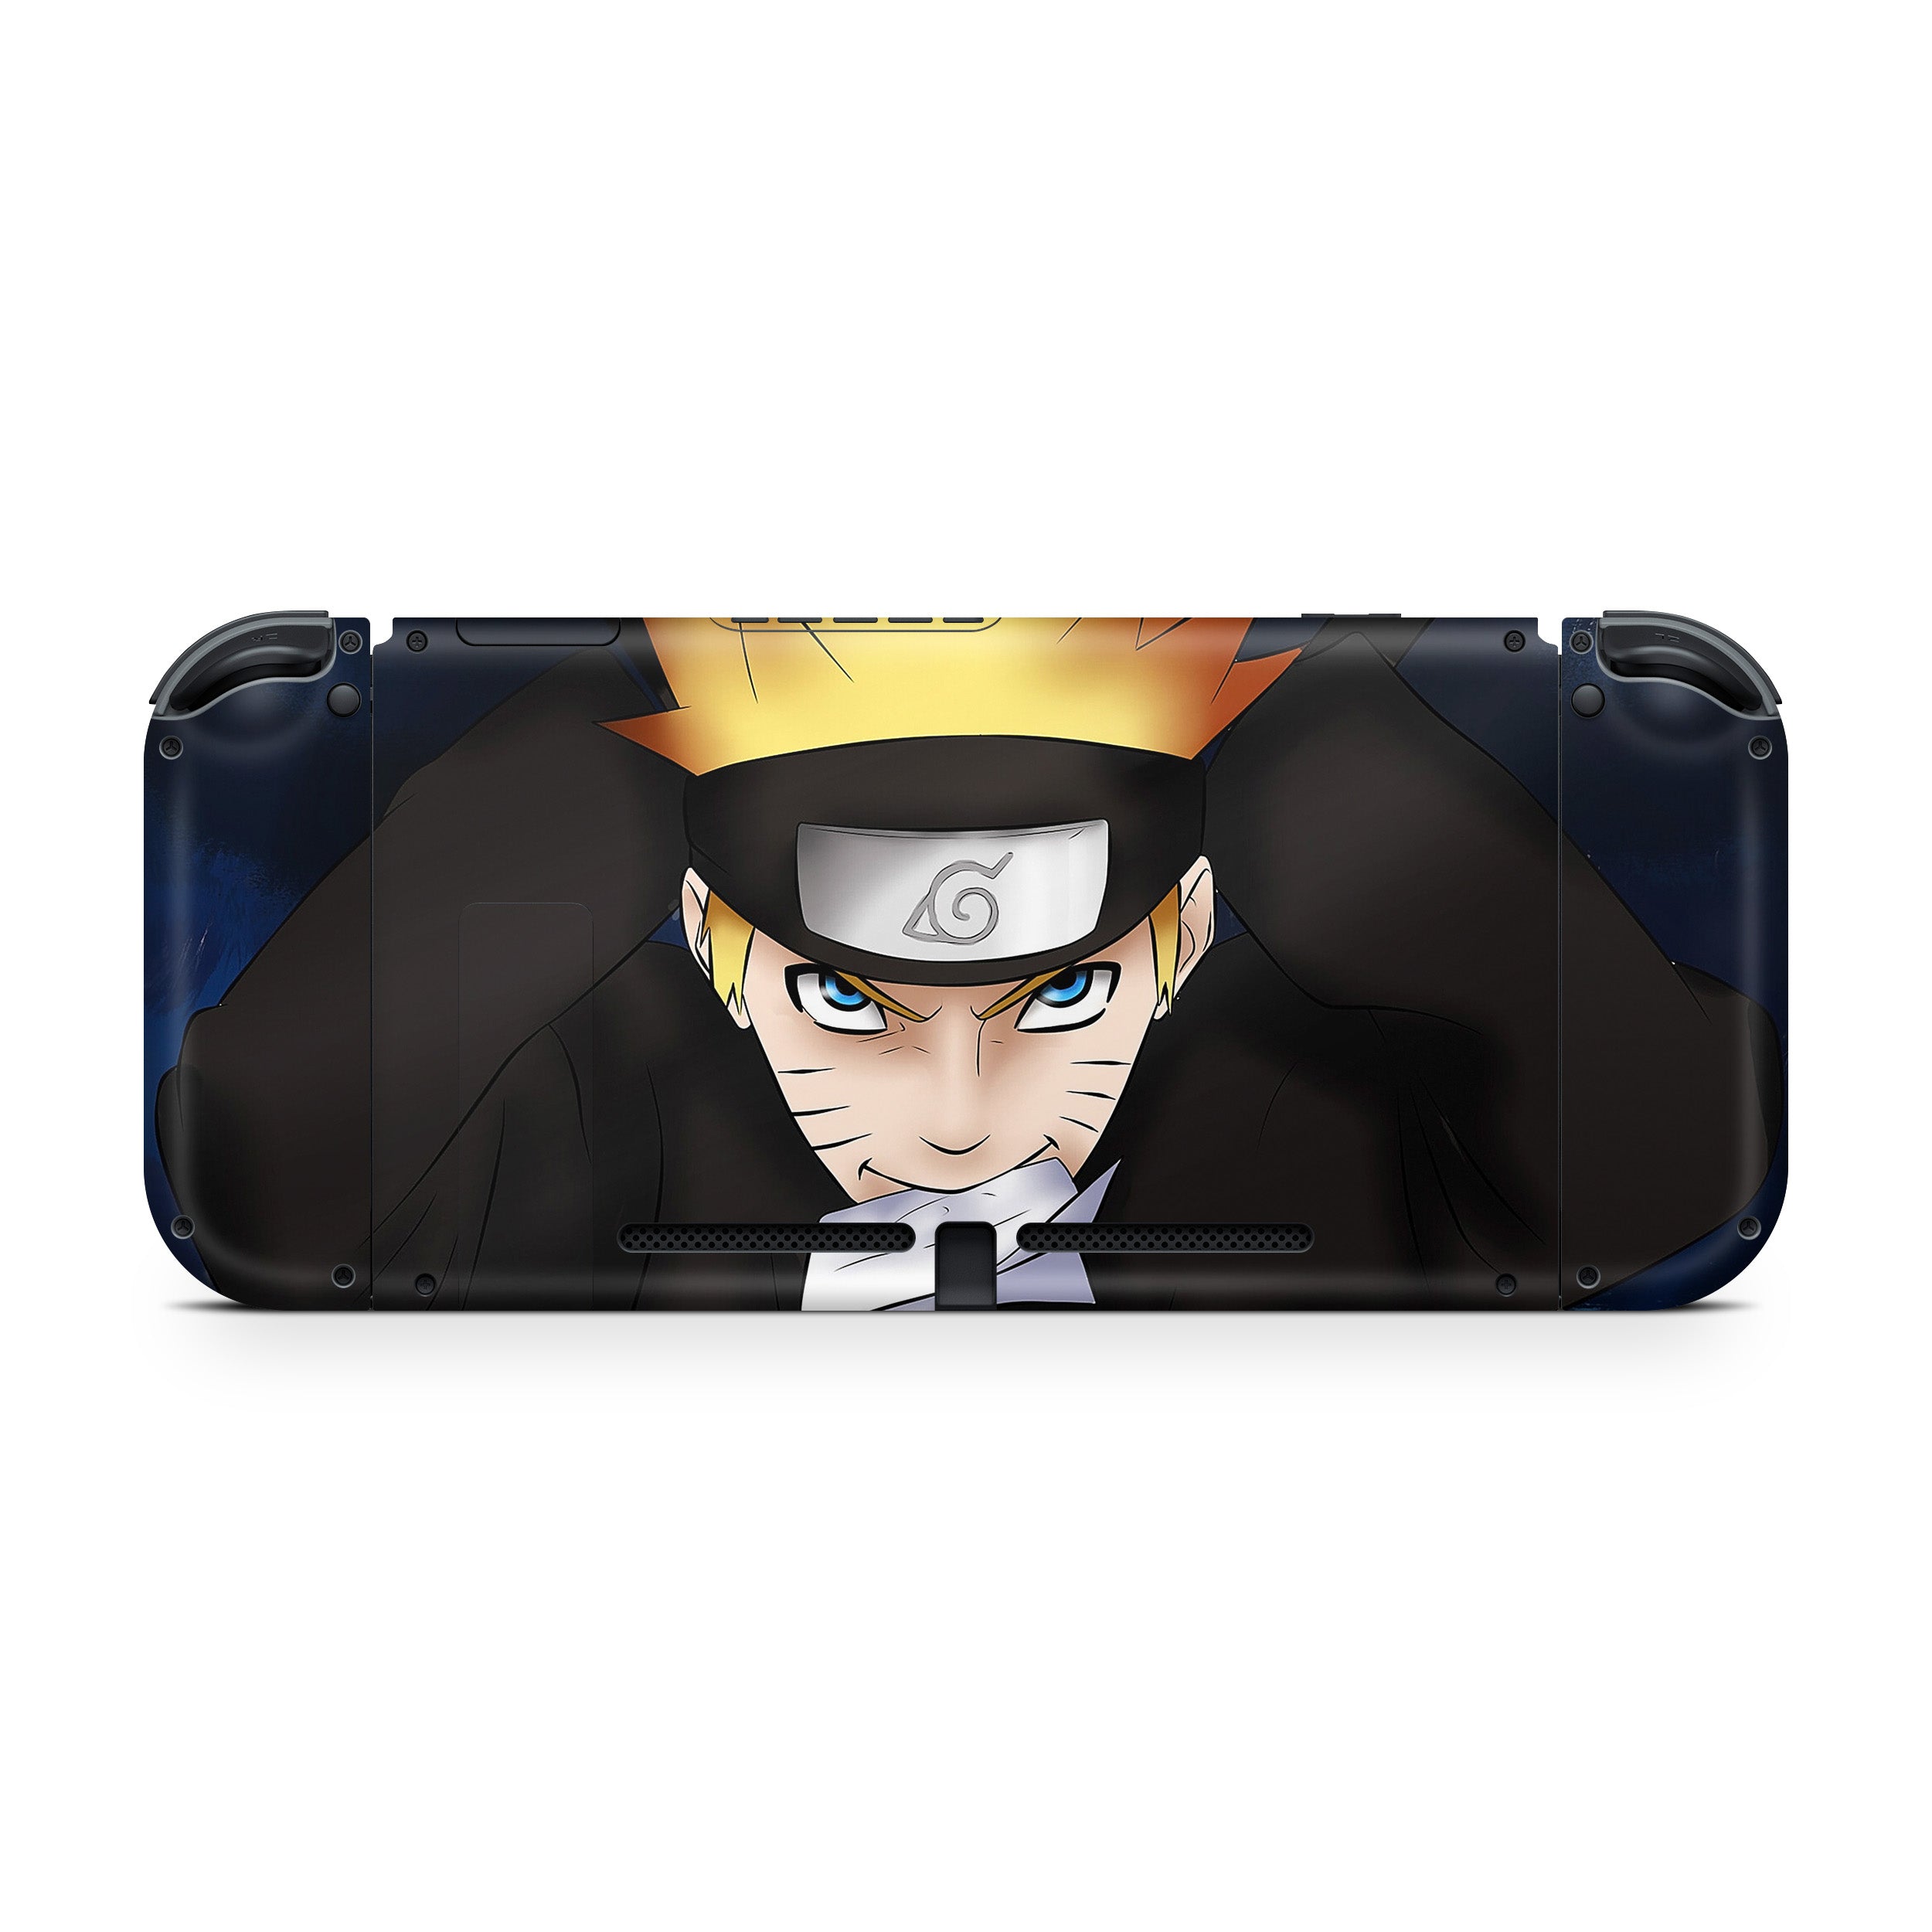 A video game skin featuring a Naruto Approach design for the Nintendo Switch.